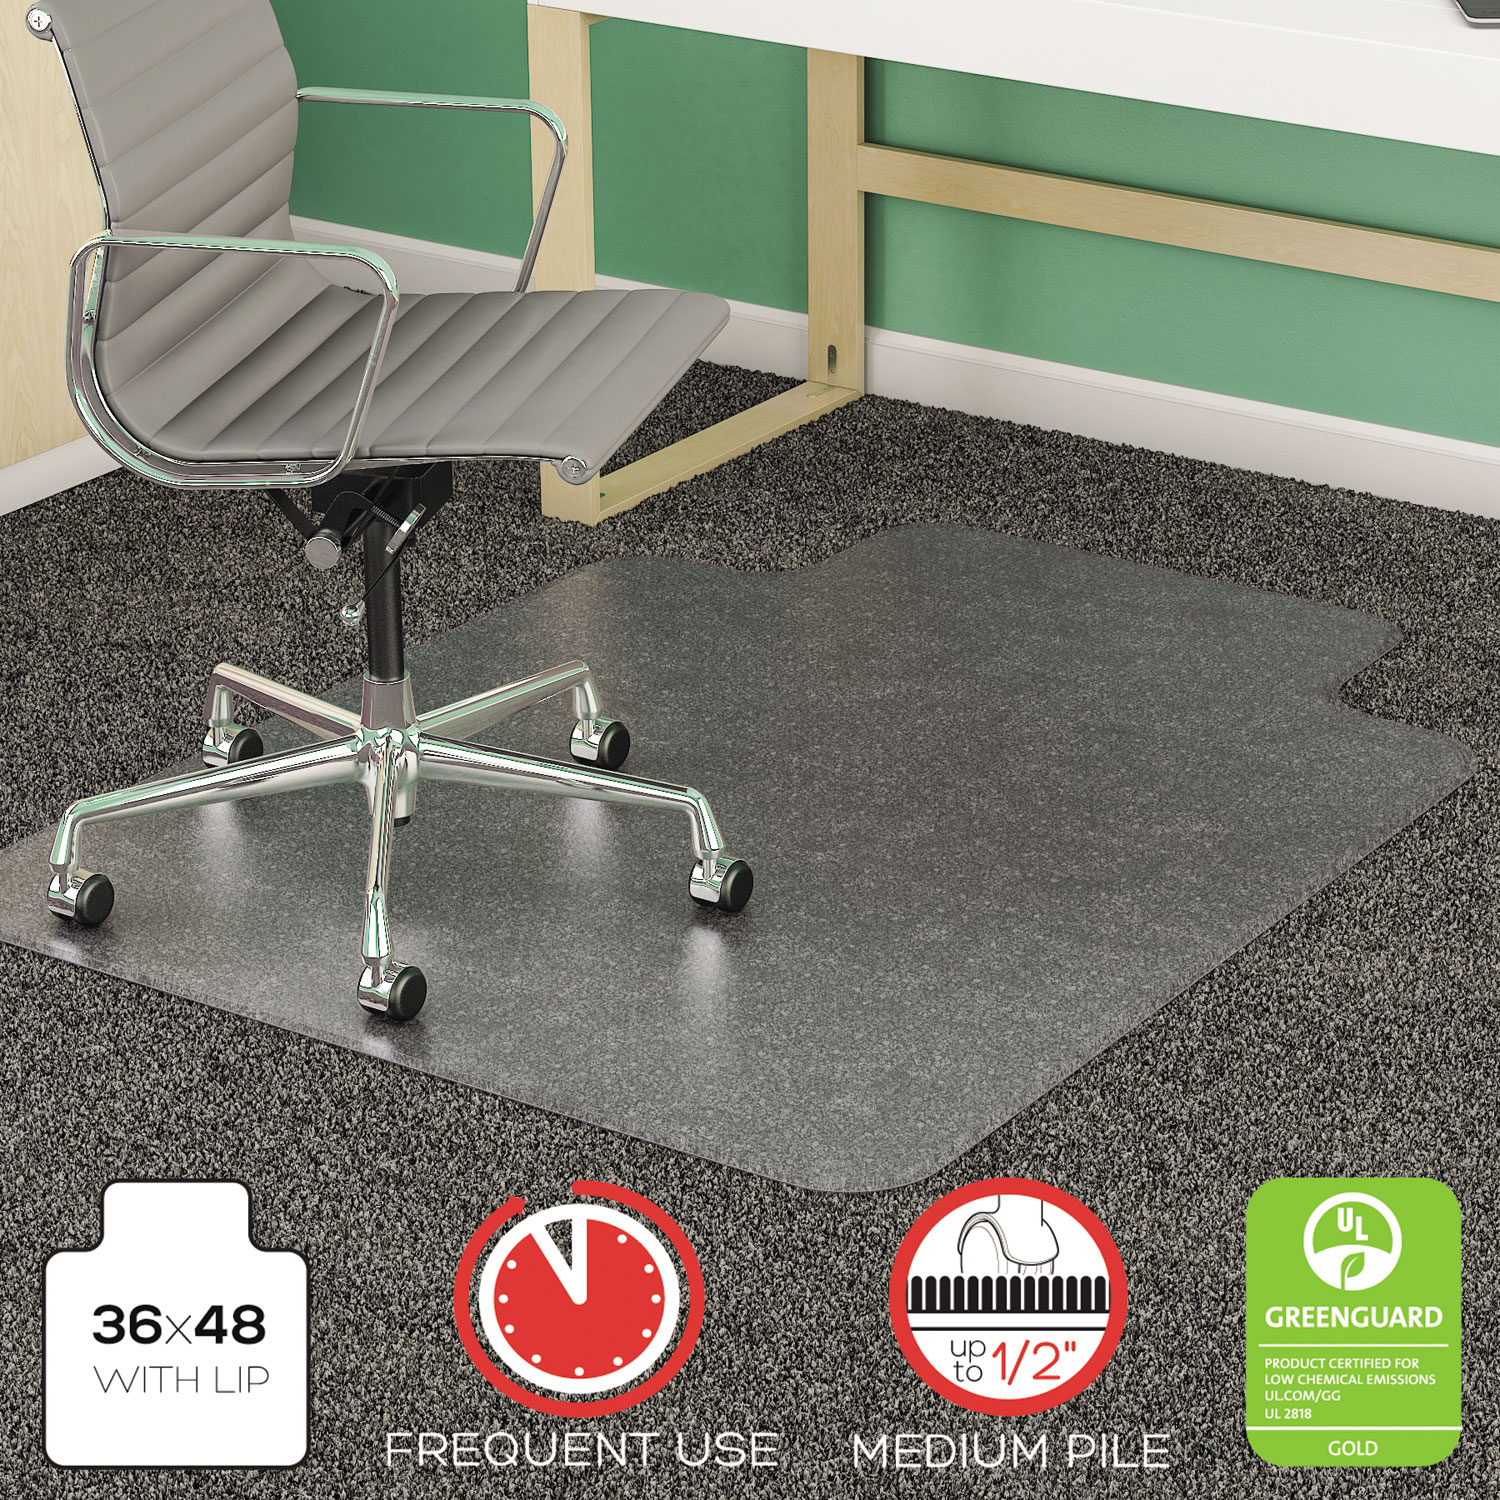  deflecto CM14113 SuperMat Frequent Use Chair Mat, Med Pile Carpet, Flat, 36 x 48, Lipped, Clear (DEFCM14113) 